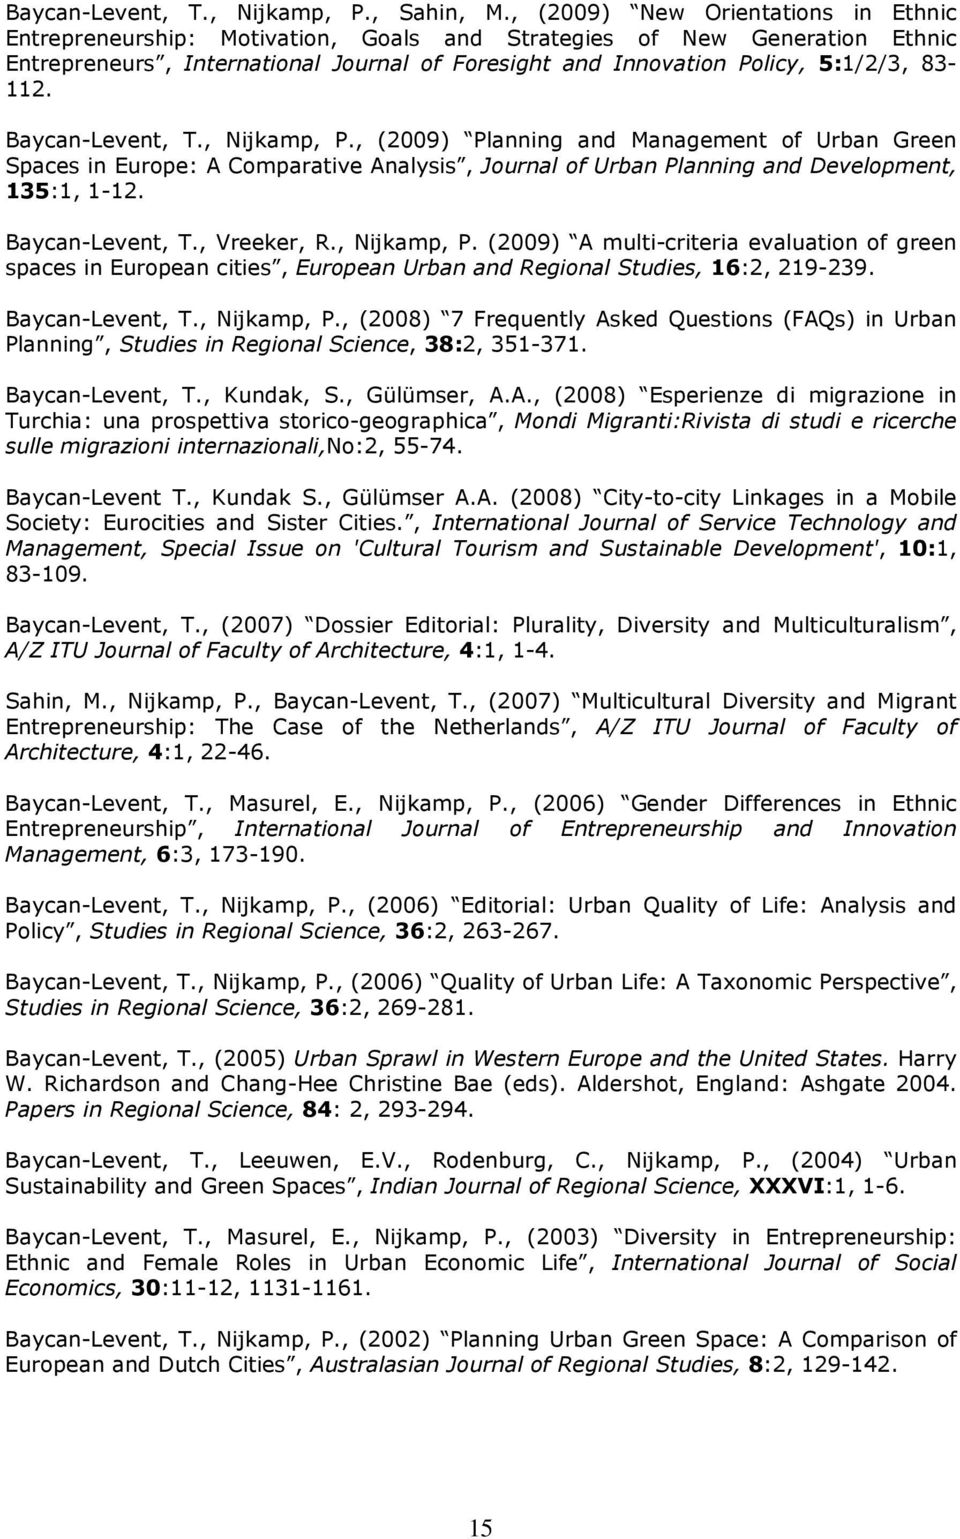 83-112. Baycan-Levent, T., Nijkamp, P., (2009) Planning and Management of Urban Green Spaces in Europe: A Comparative Analysis, Journal of Urban Planning and Development, 135:1, 1-12.